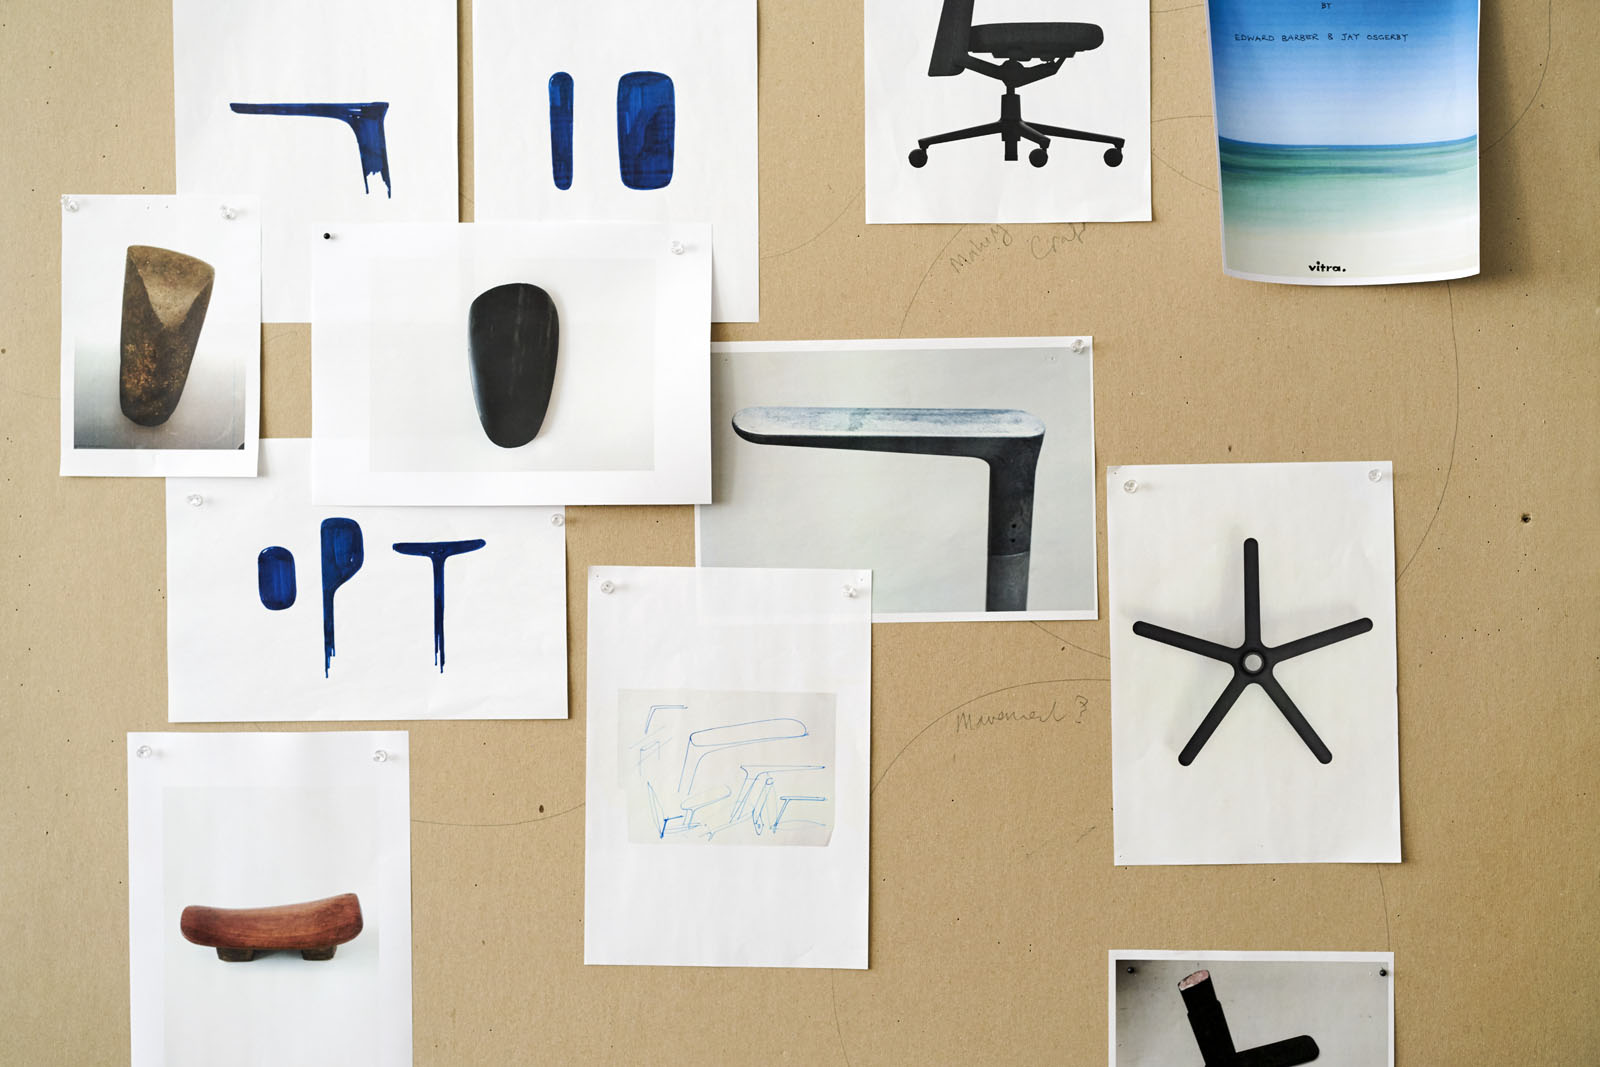 How Barber Osgerby pitched their Pacific chair to Jony Ive, design, Agenda